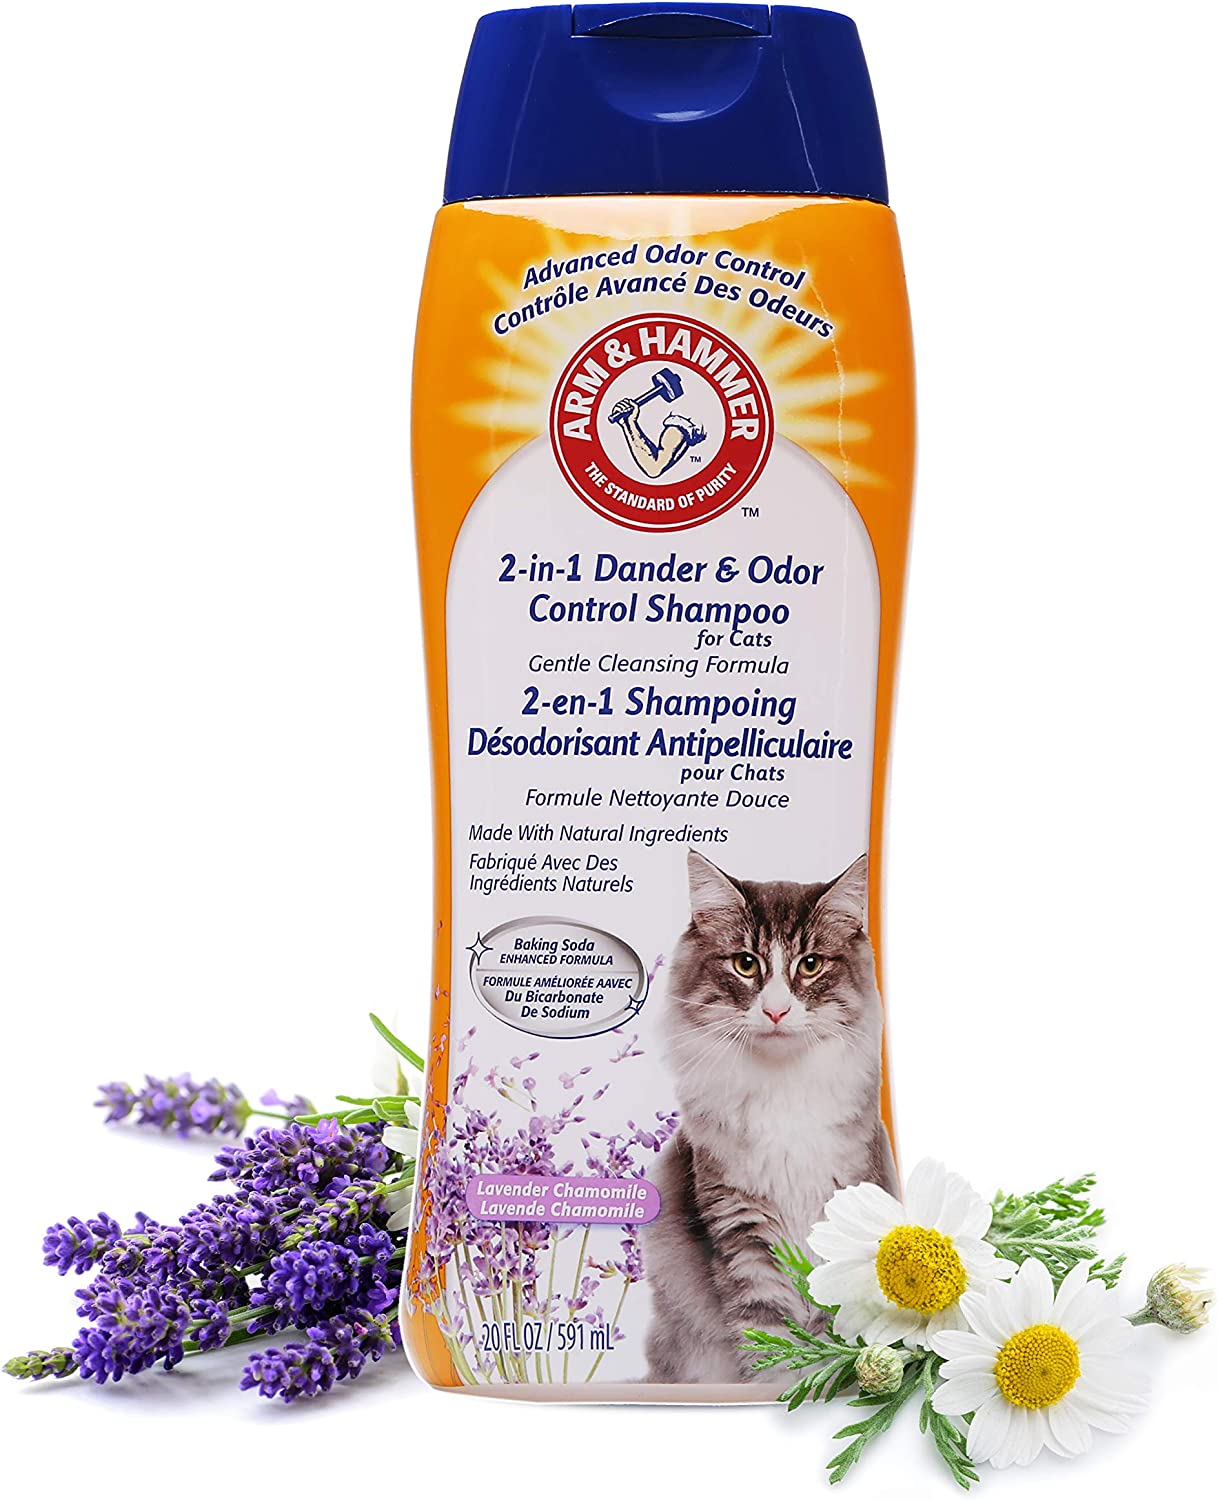 Arm & Hammer 2-in-1 Deodorizing & Dander Reducing Shampoo for Cats Baking Soda Moisturizes and Deodorizes, Lavender Chamomile Scent, 20 Fl Oz